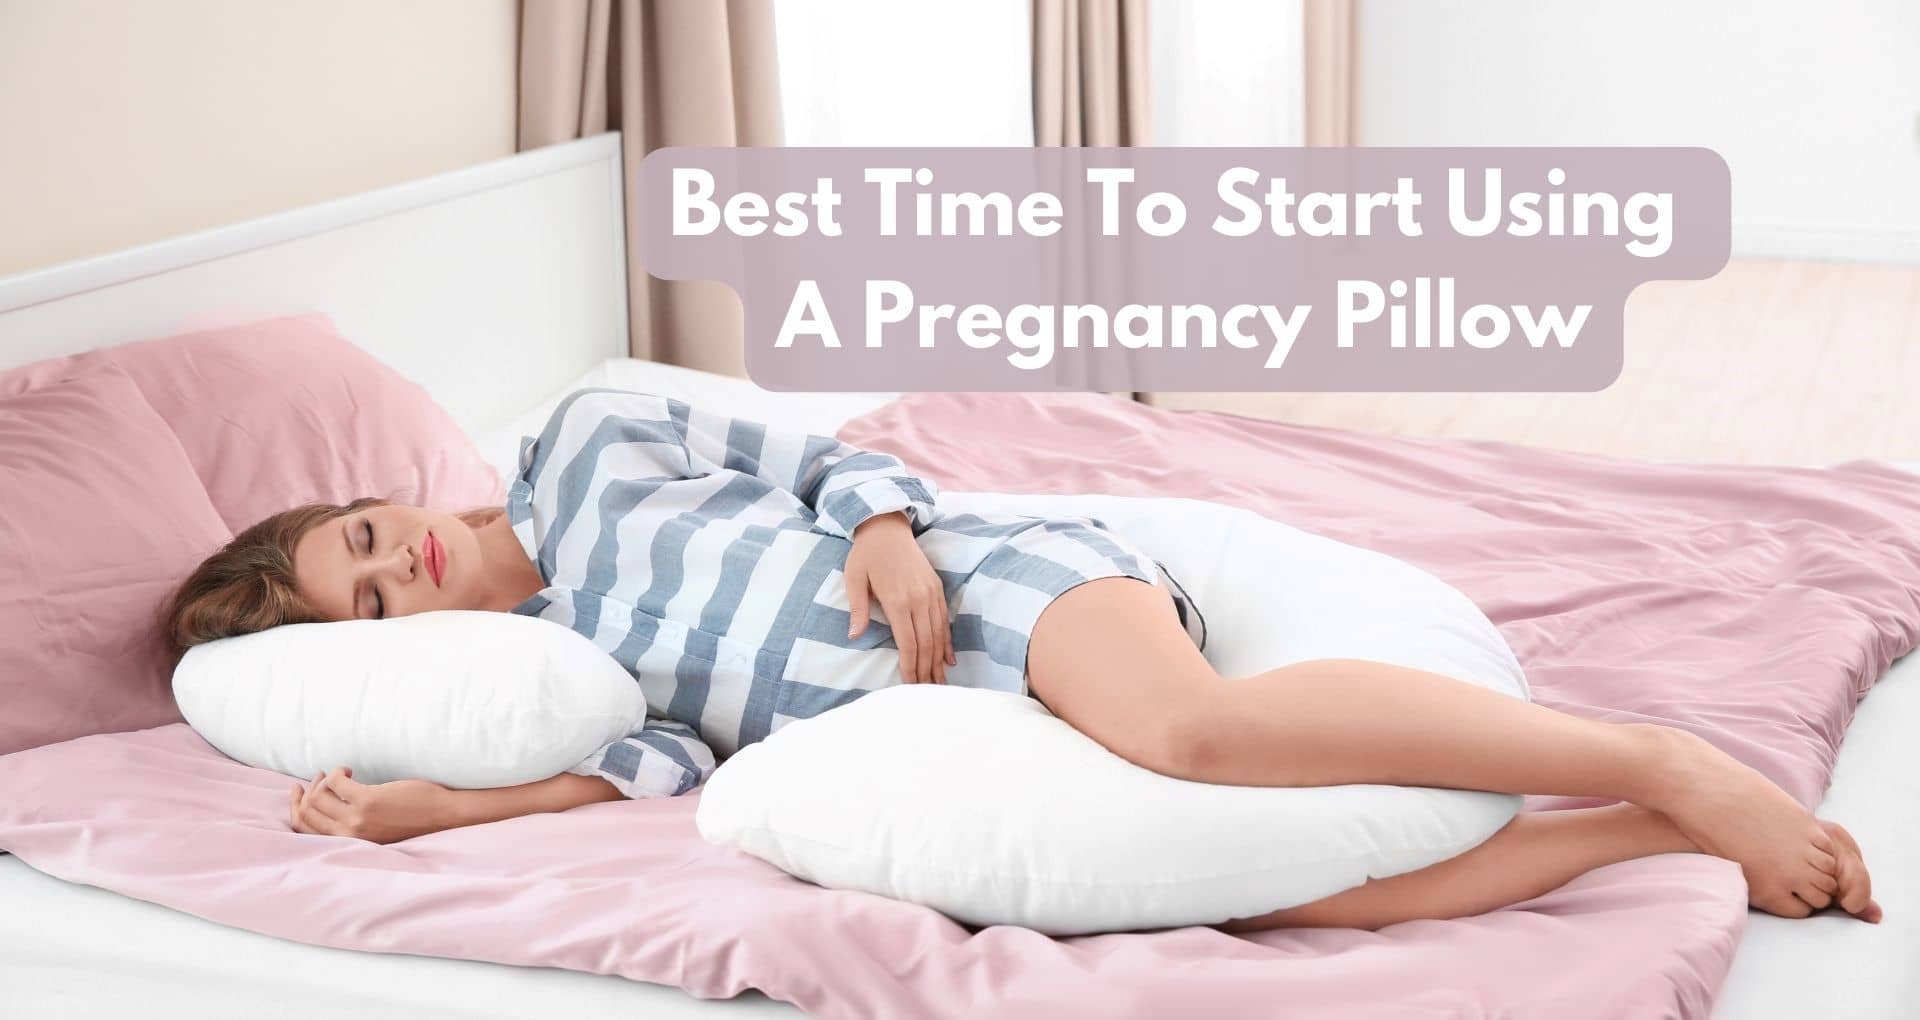 Best Time To Start Using A Pregnancy Pillow